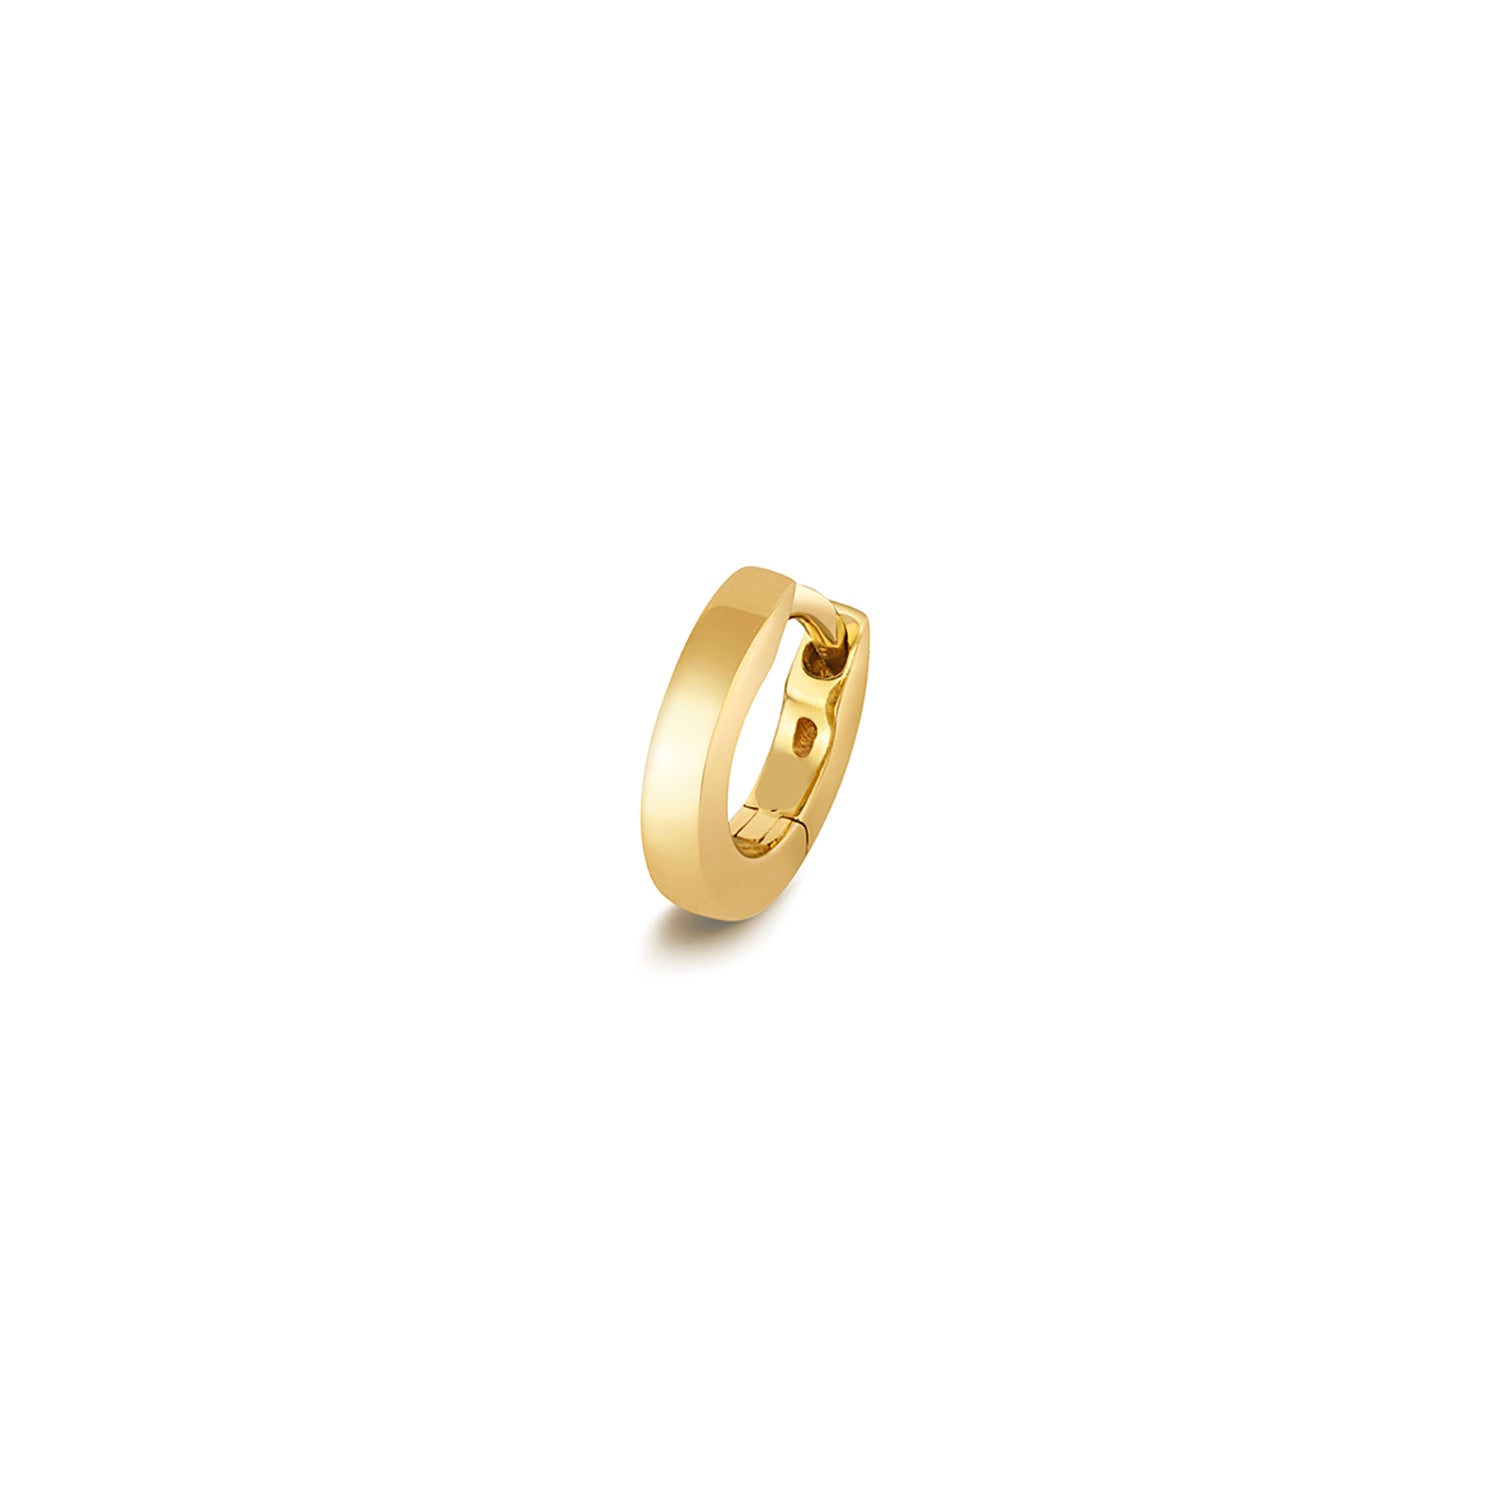 18CT GOLD CARTILAGE EARRING SOLID SQ TUBE